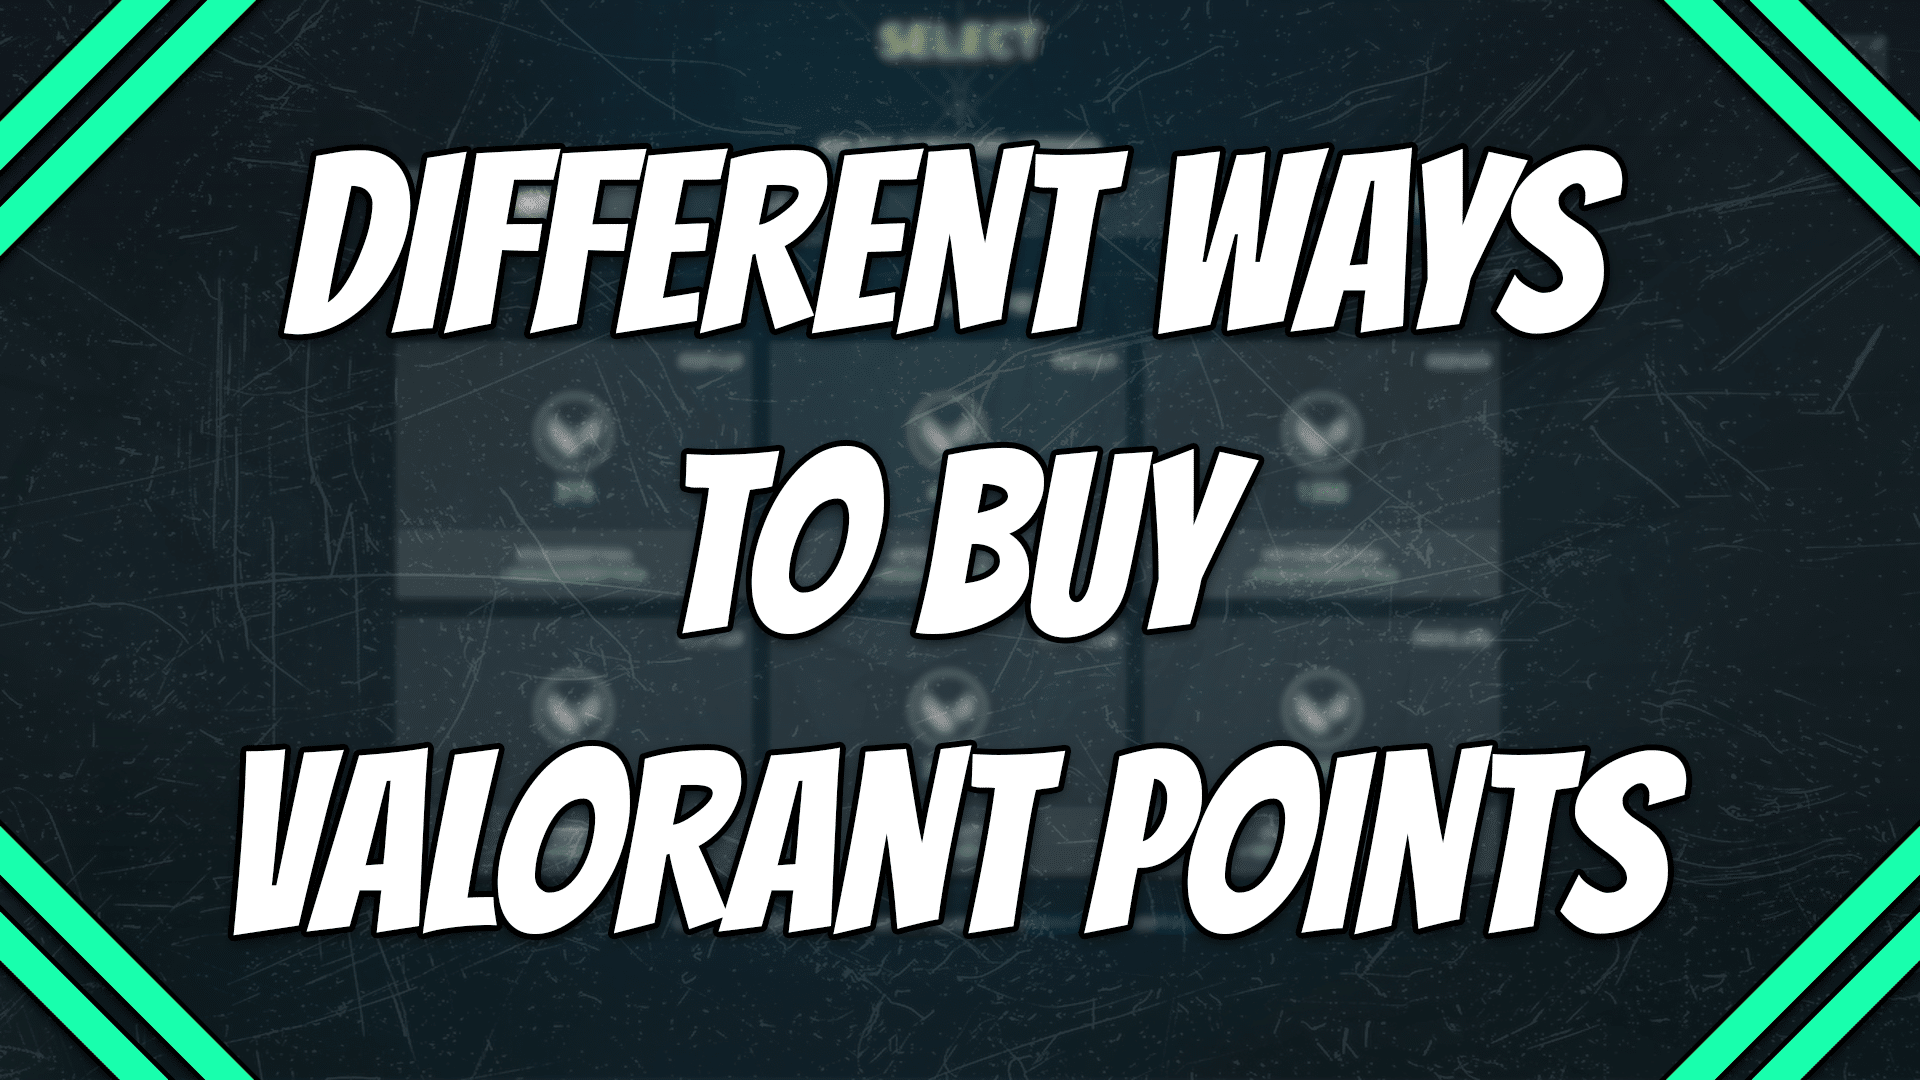 Different ways to buy Valorant points title card